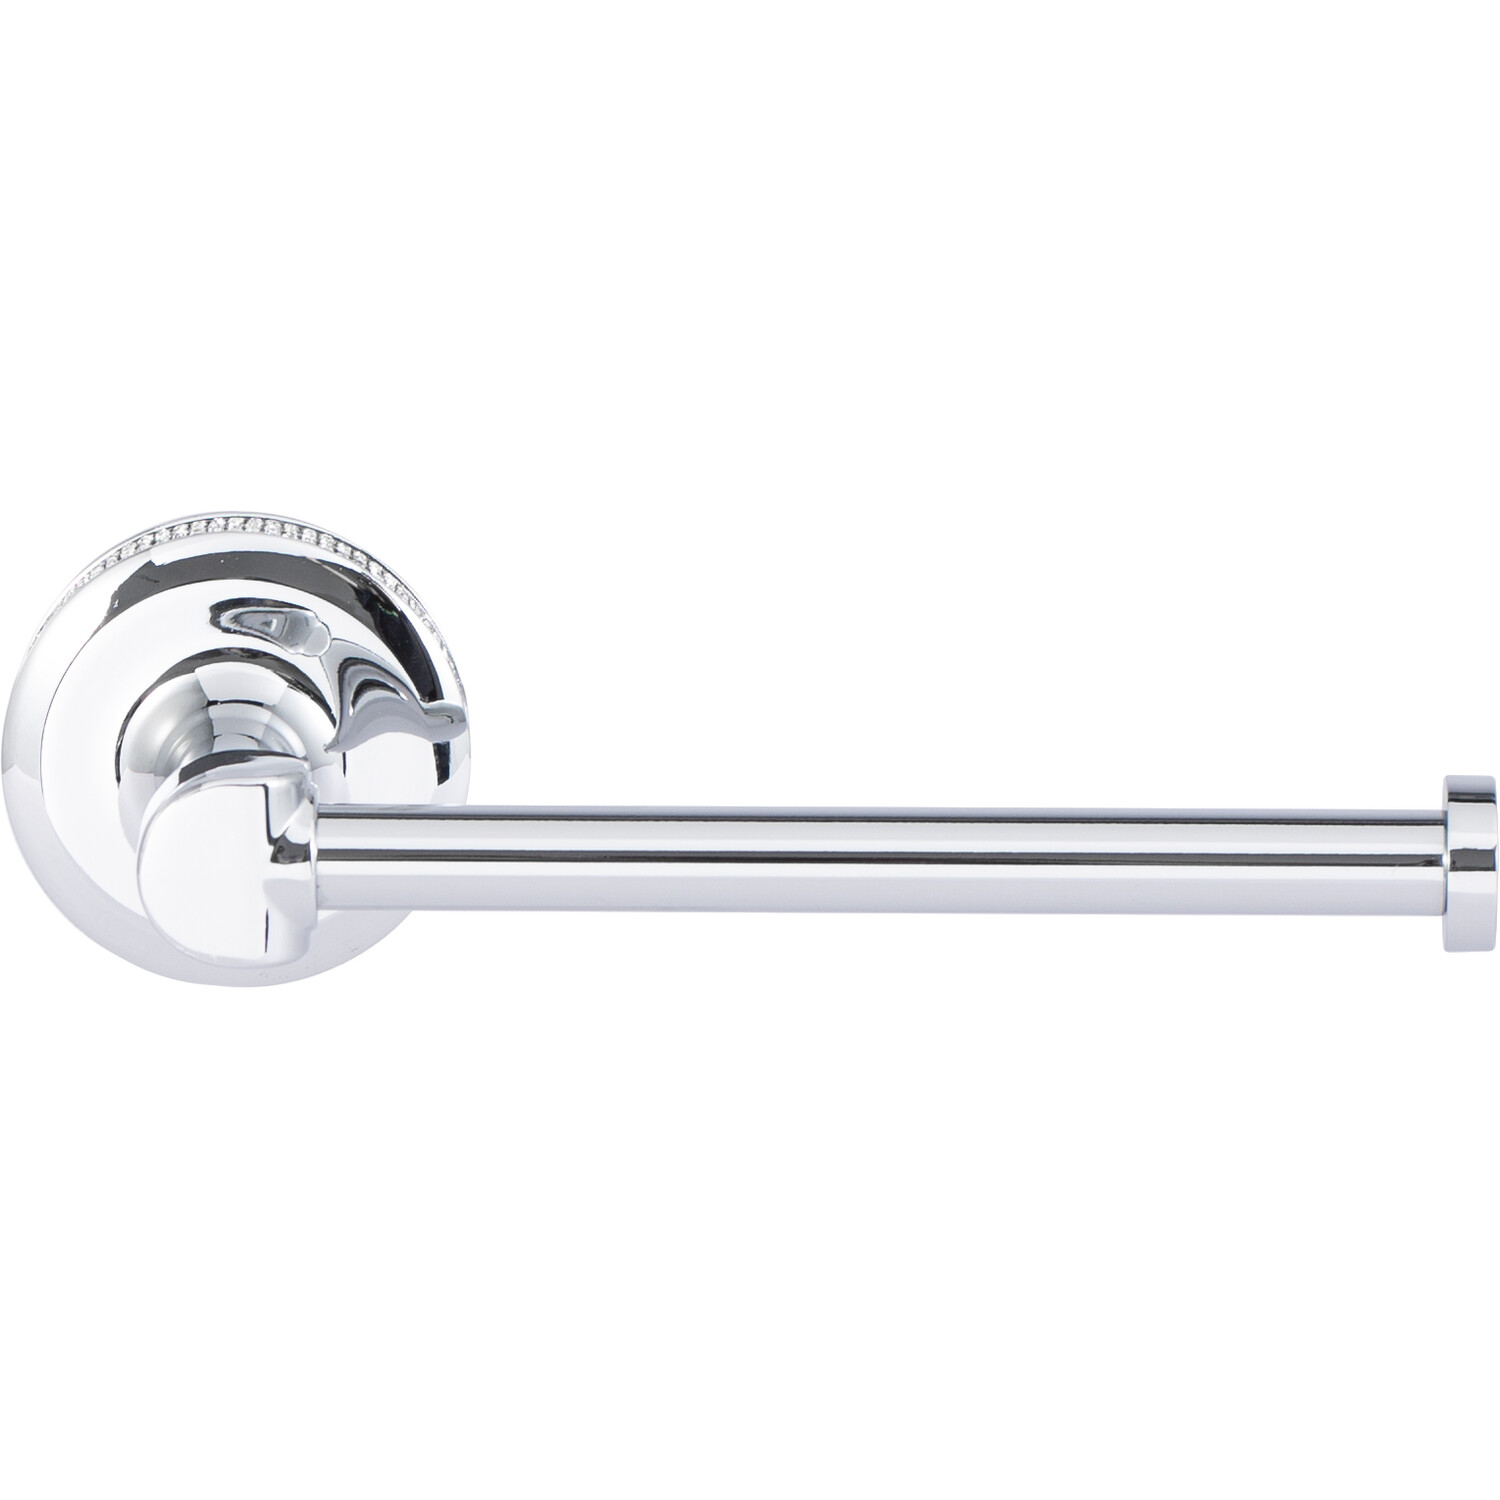 Victoria Silver Toilet Roll Holder Image 1